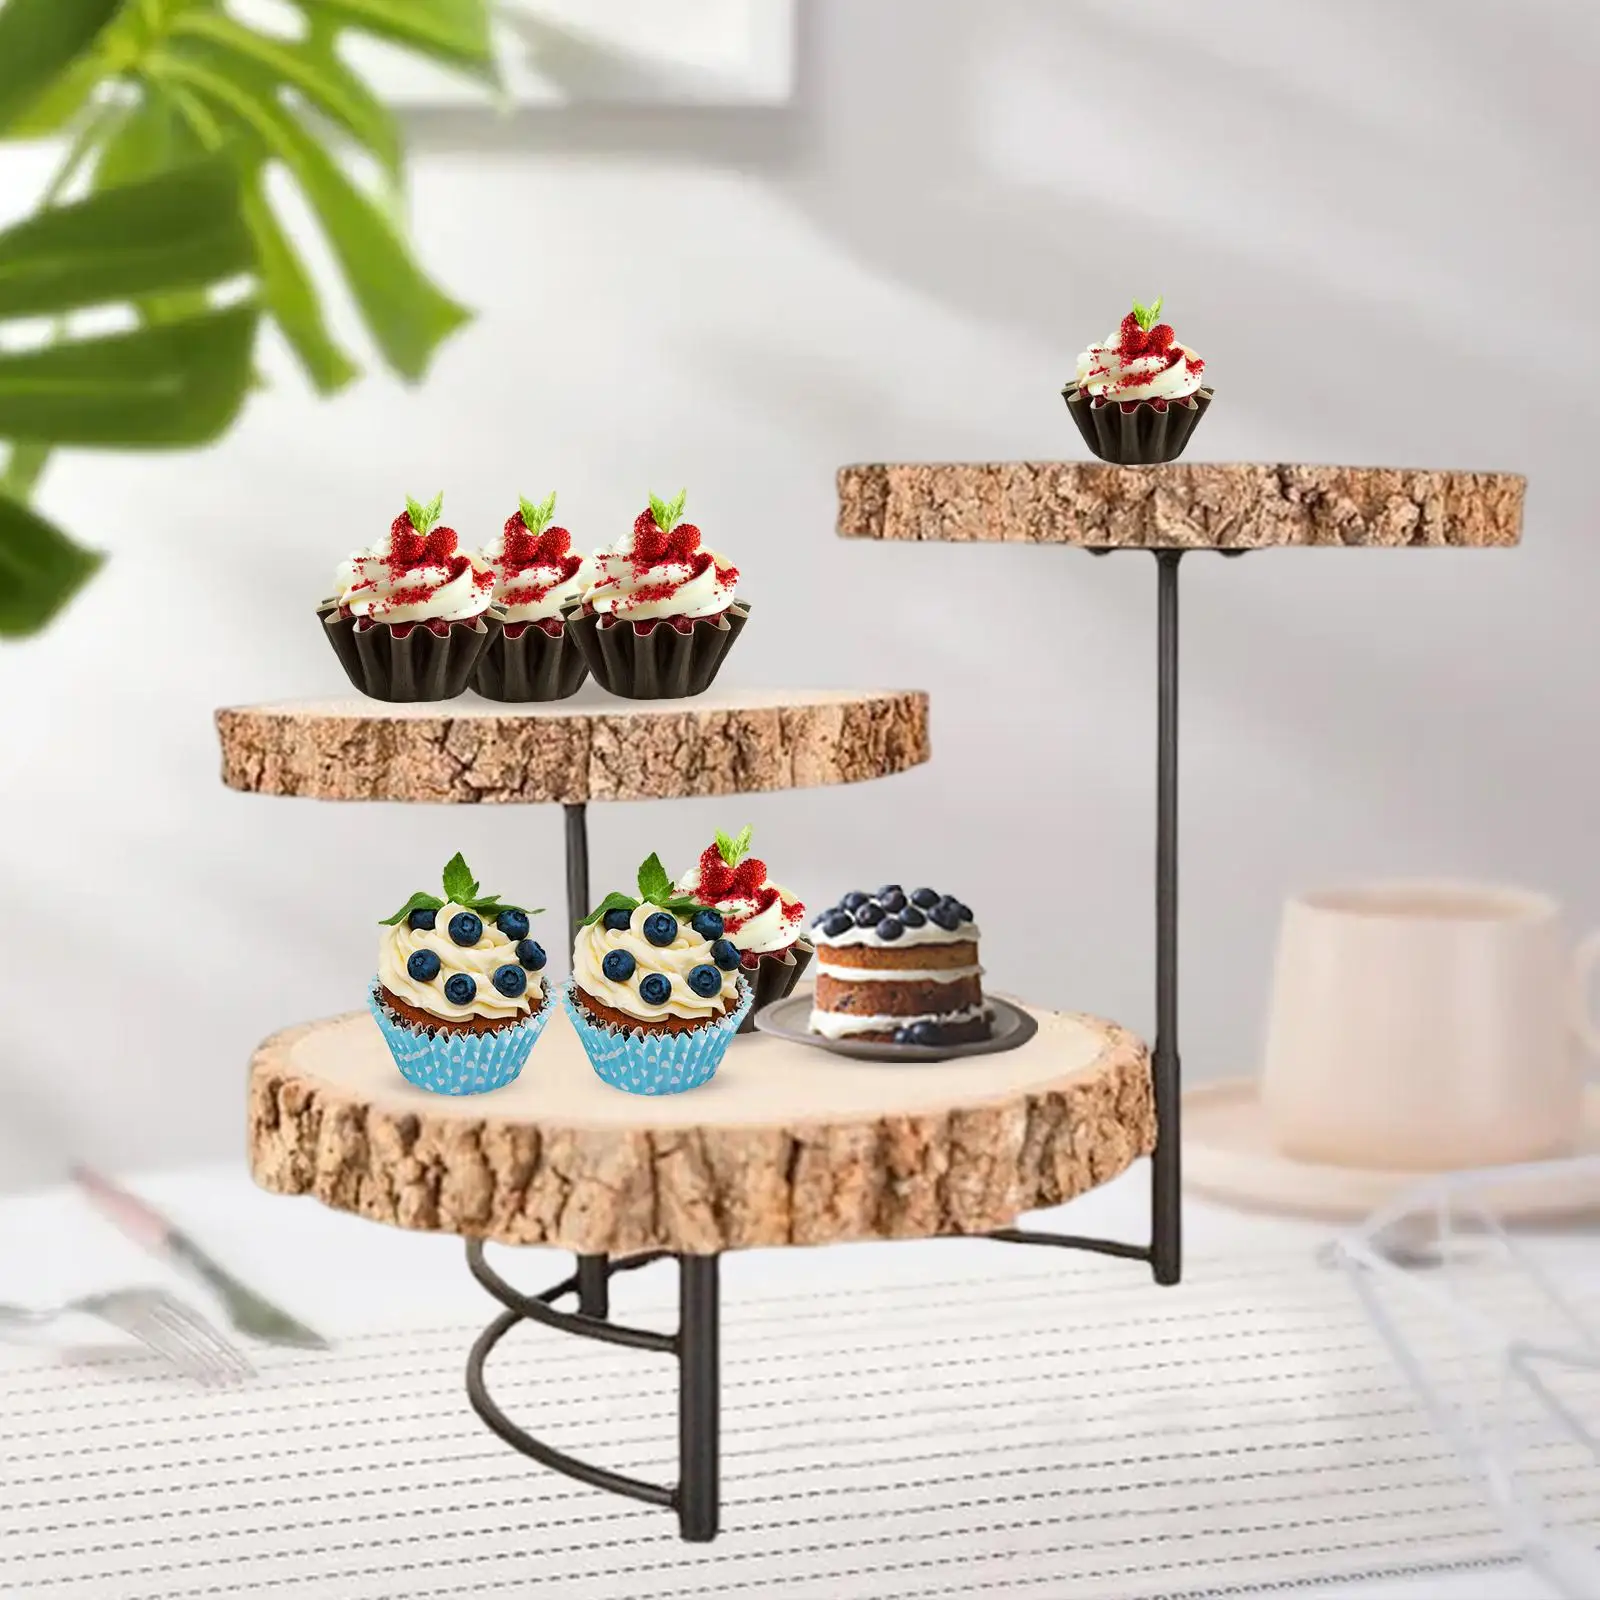 Removable Wooden Cake Stands 3 Layers Dessert Tray Display Plate Cake Pedestal Stand Party Wedding Entertaining Bedroom Hotel